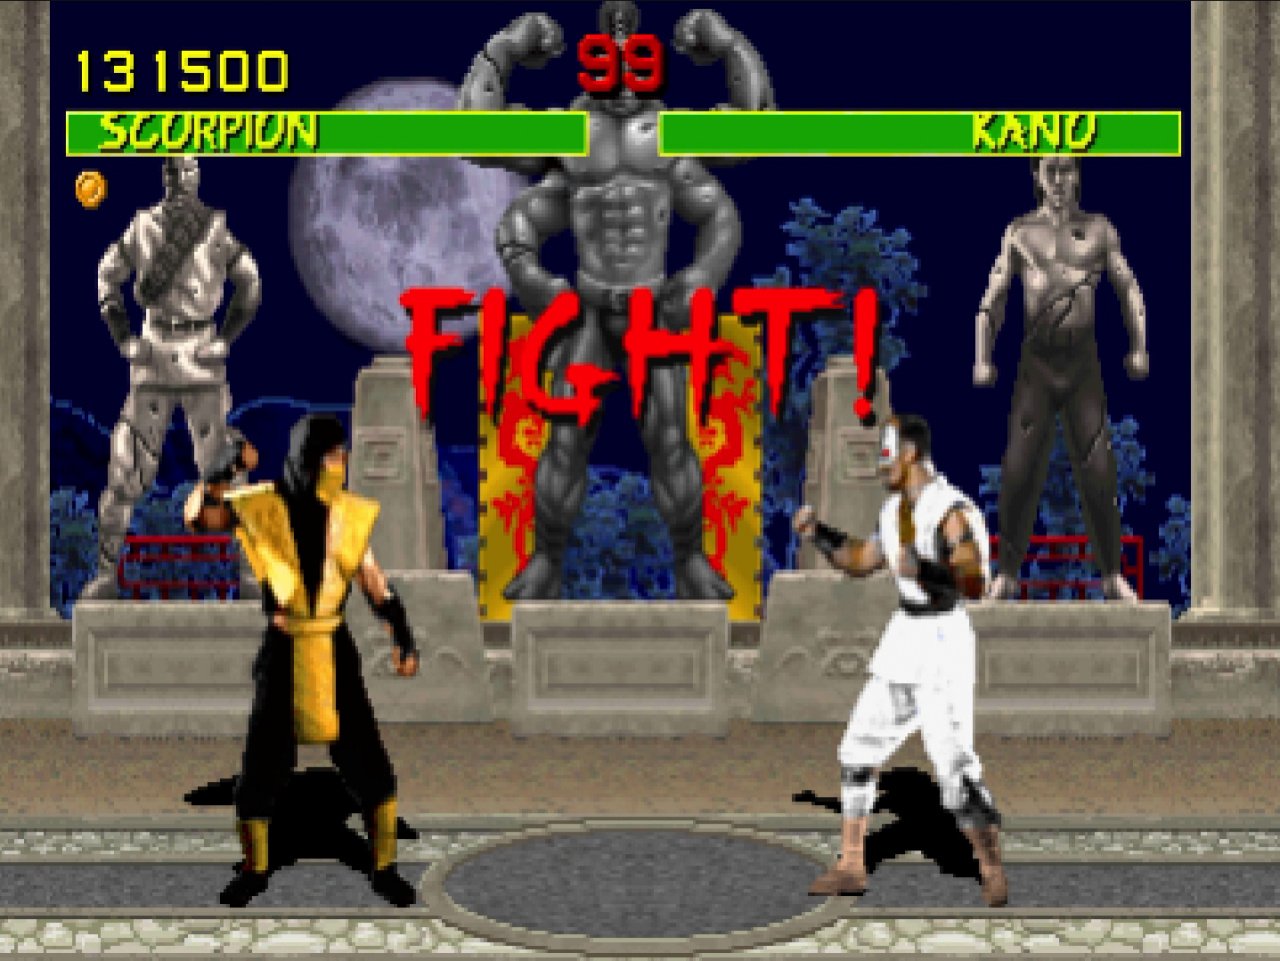 Mortal Kombat review: Glorious action and fatalities, but shallow